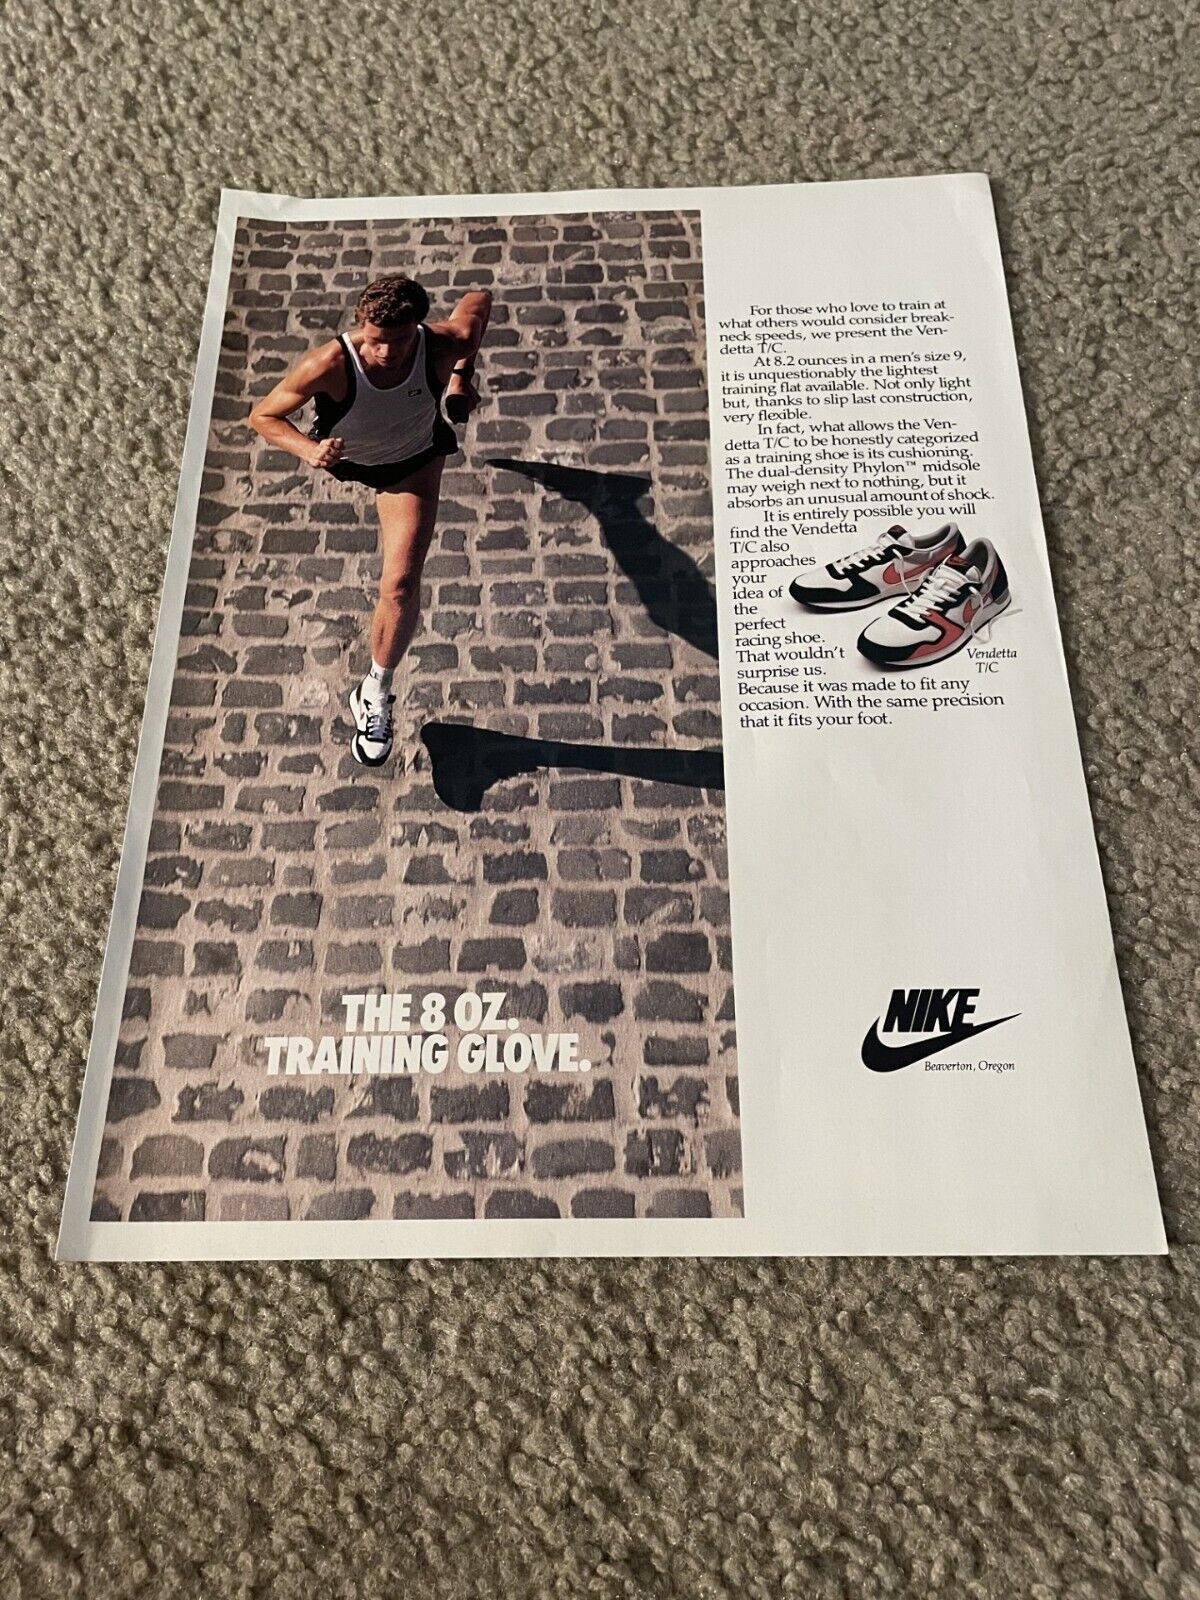 Vintage 1987 NIKE VENDETTA T/C Trainer Running Shoes Poster Print Ad 1980s